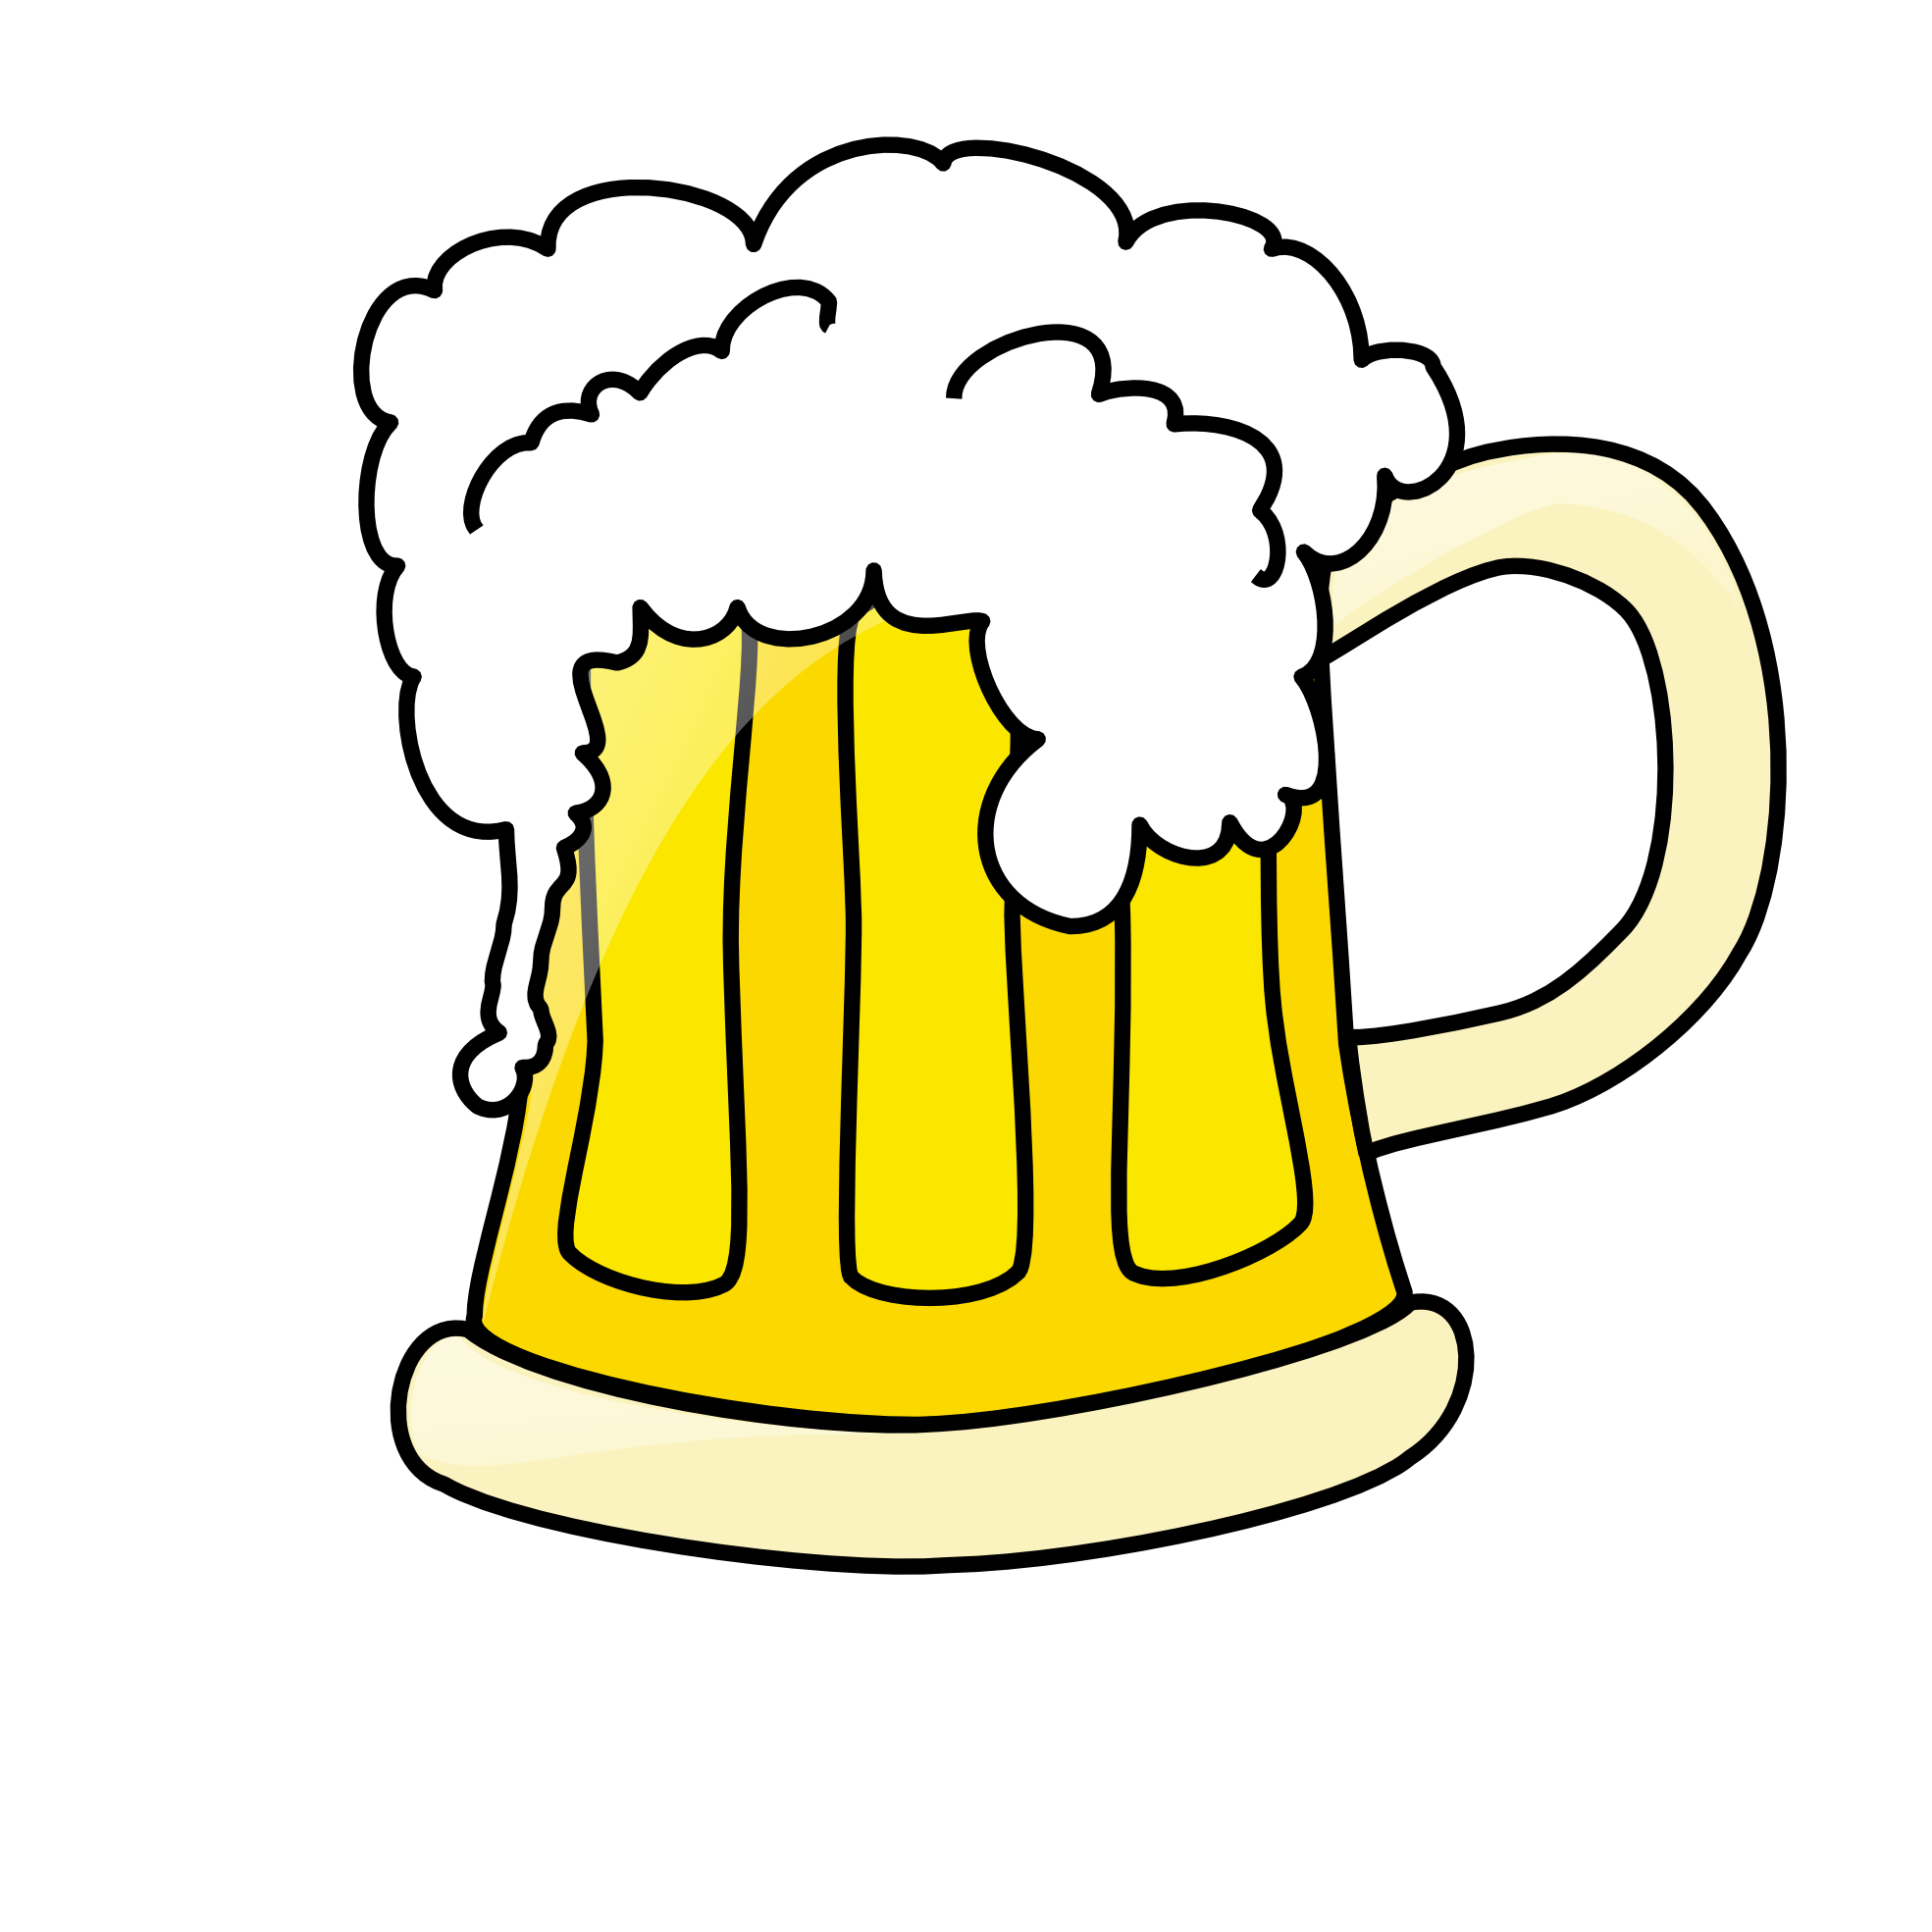 Beer cheers clipart png